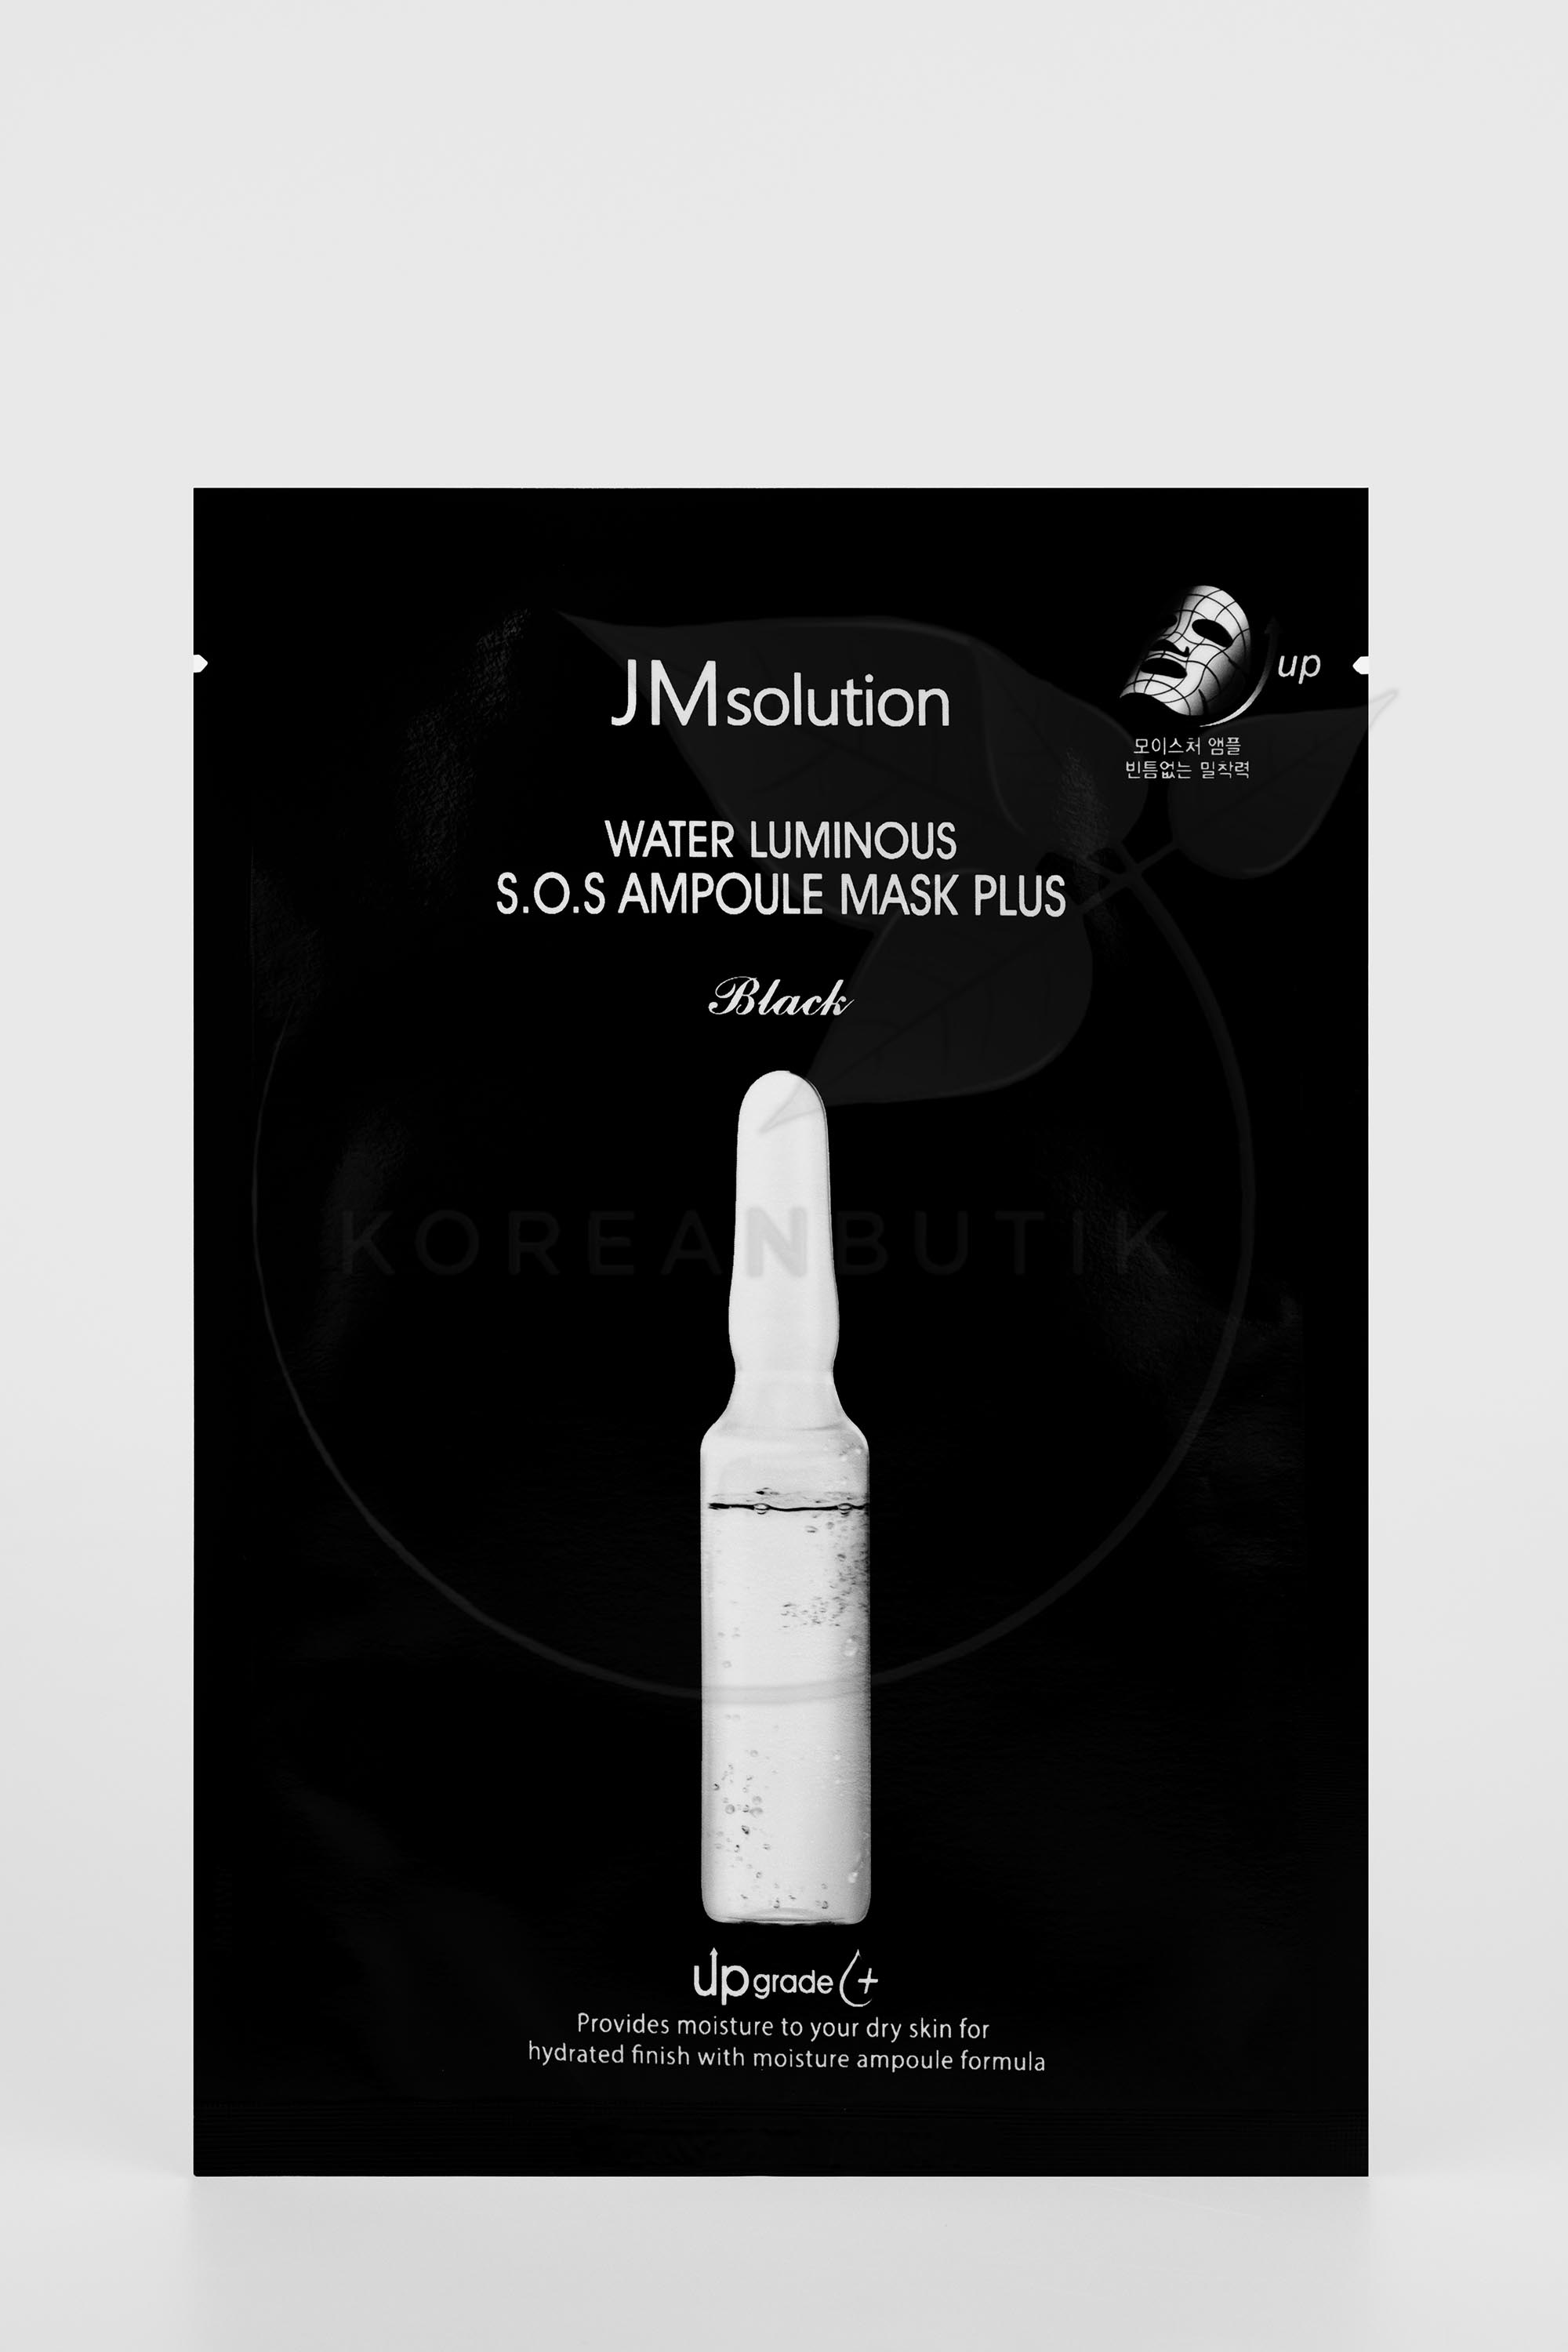  JMsolution Water Luminous S.O.S. A..